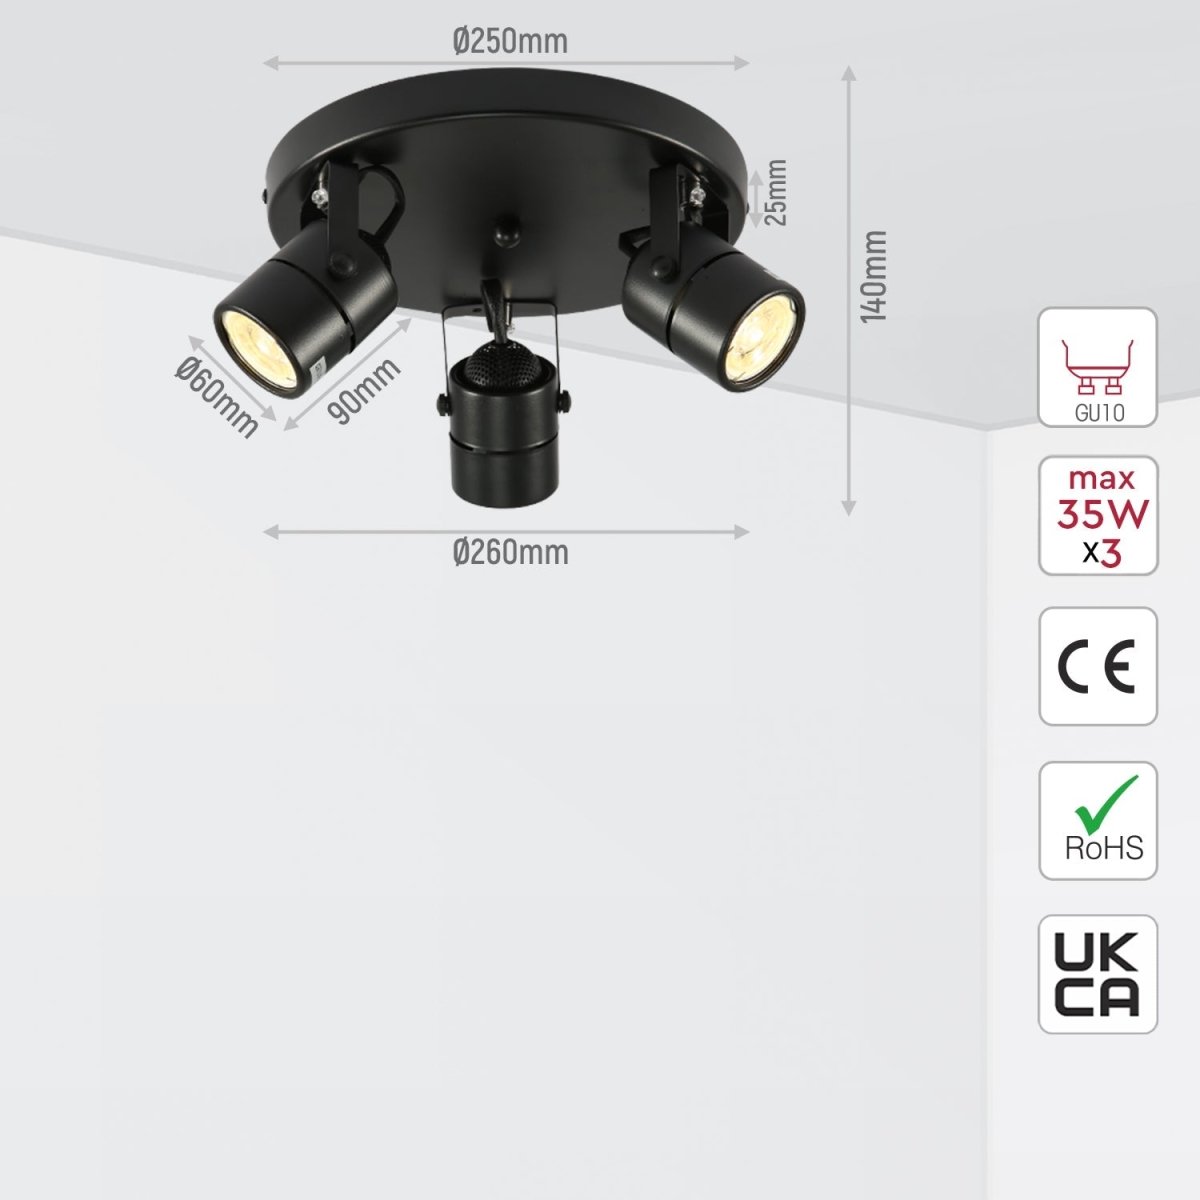 Size and specs of 3 Way Mane Tray Spotlight with GU10 Fitting Black | TEKLED 172-03076